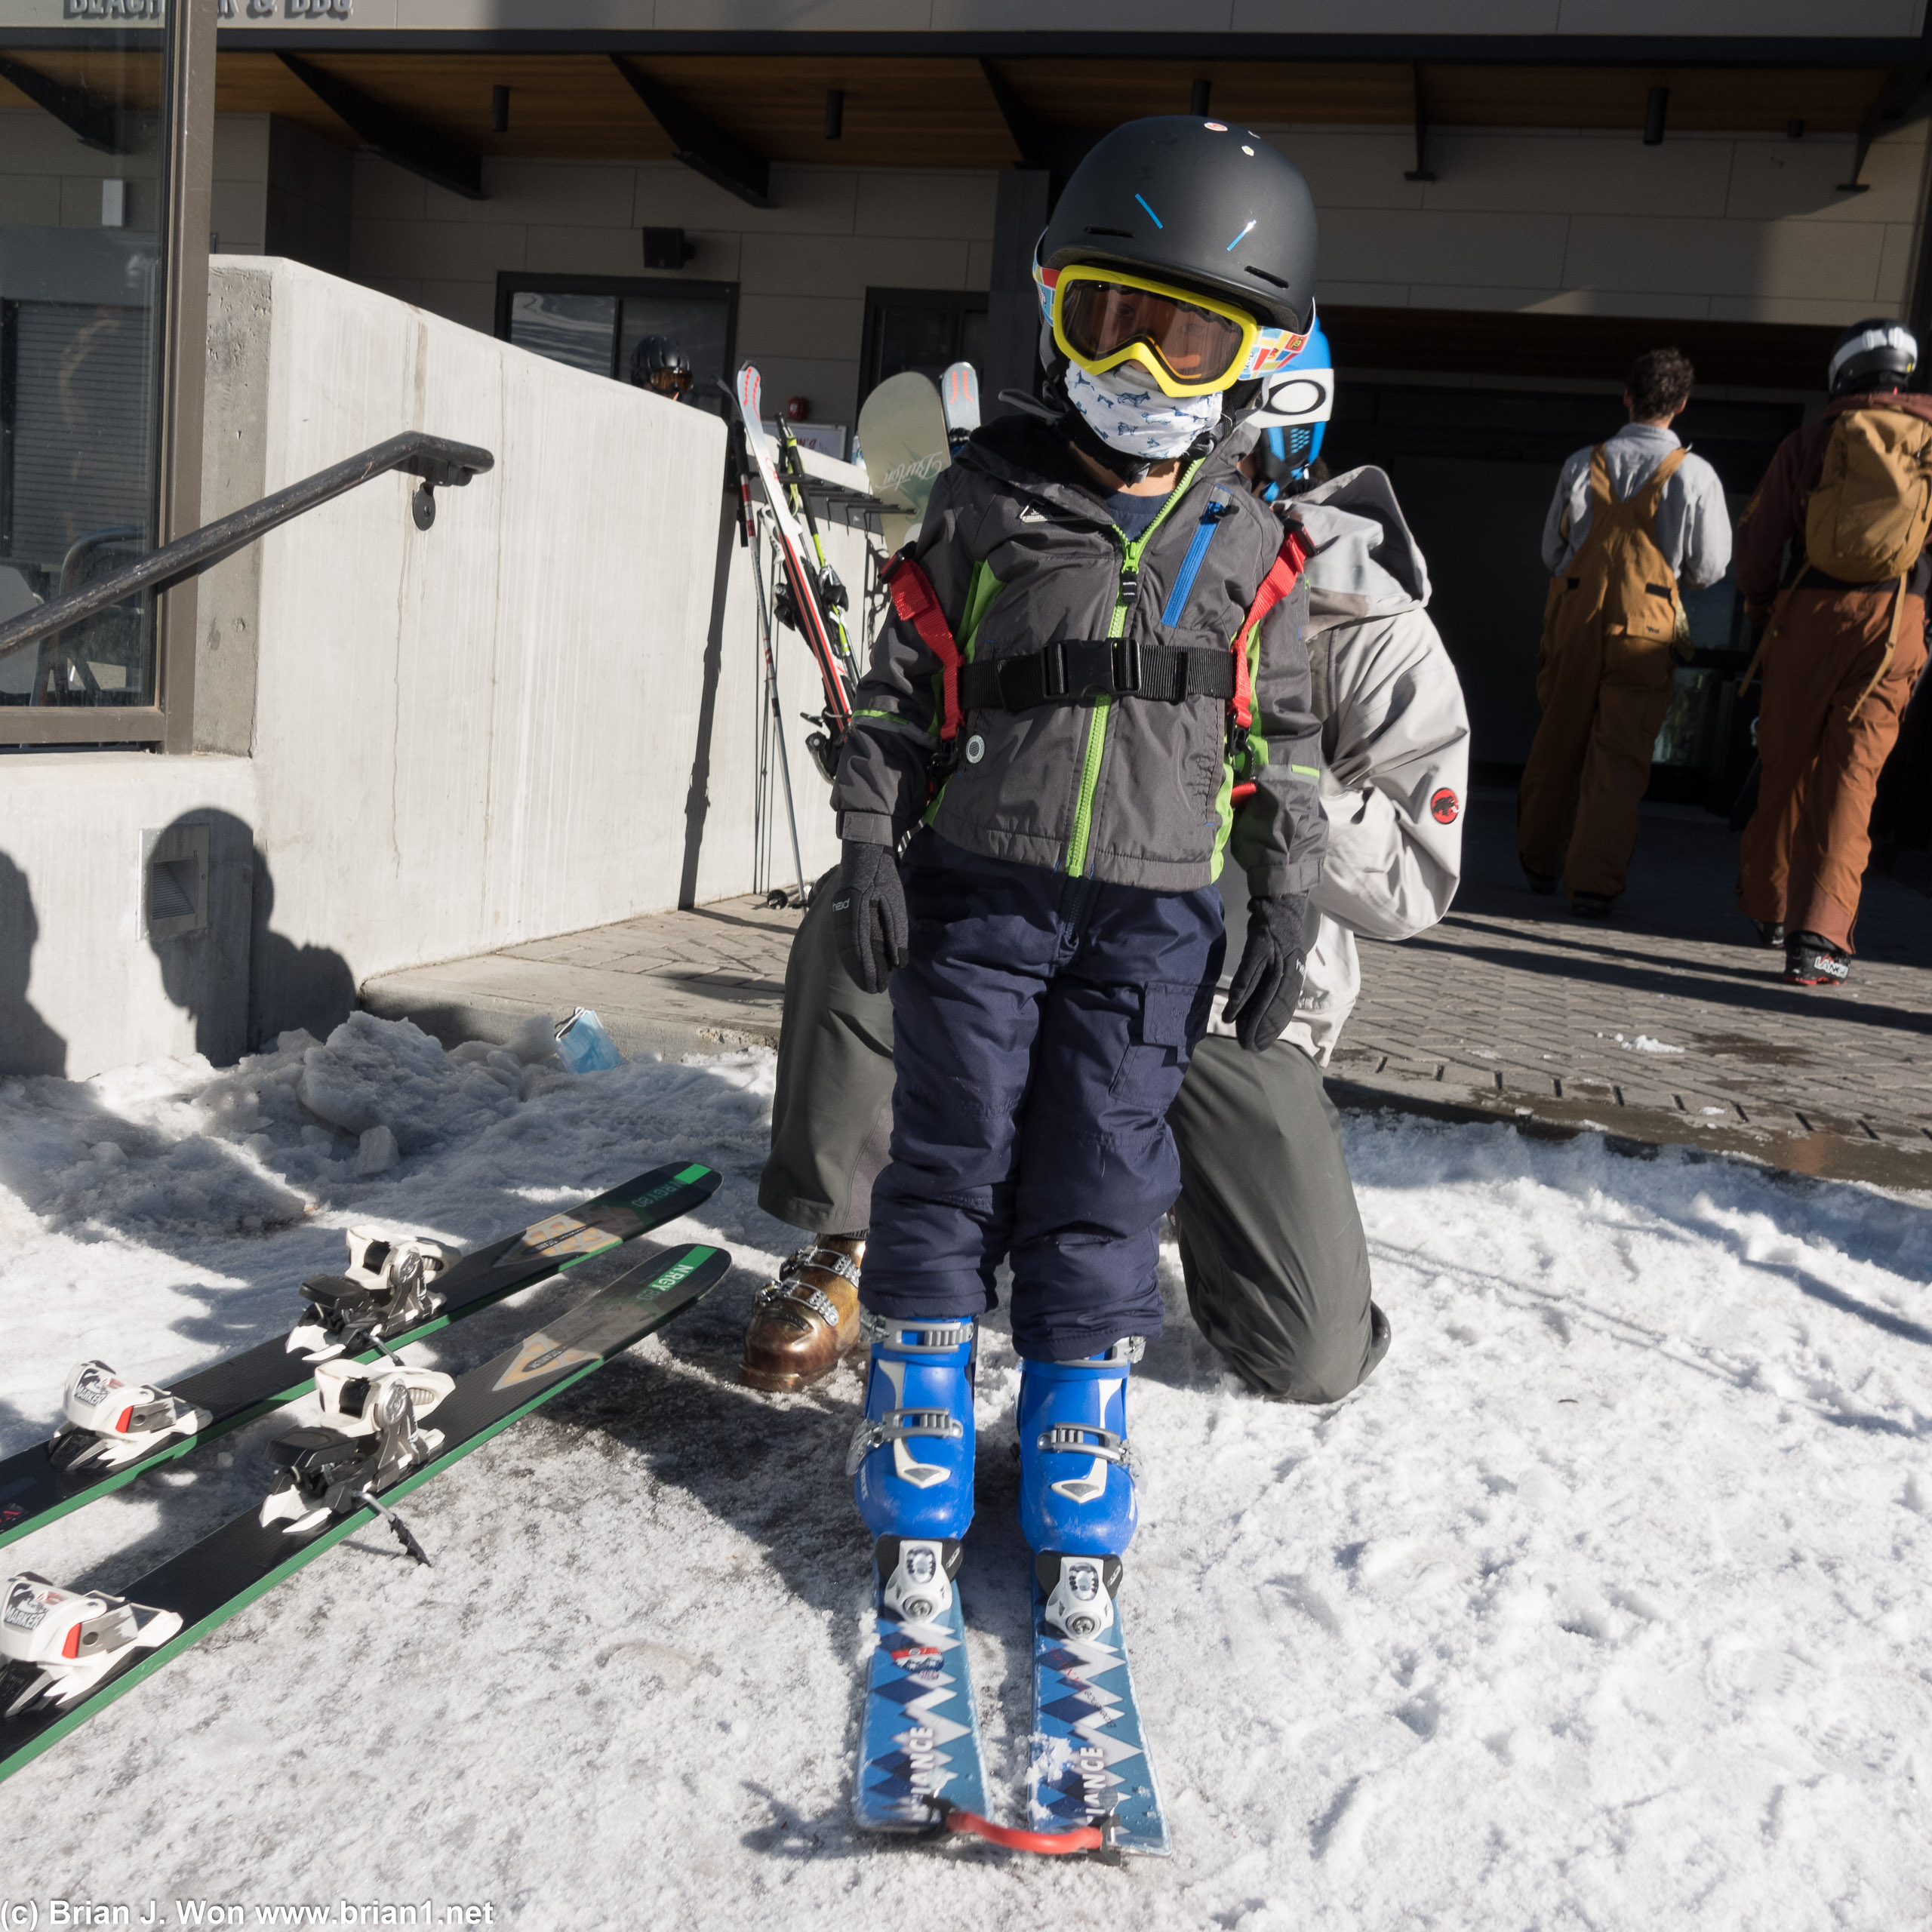 Getting a small child ready for skiing is a lot of effort.